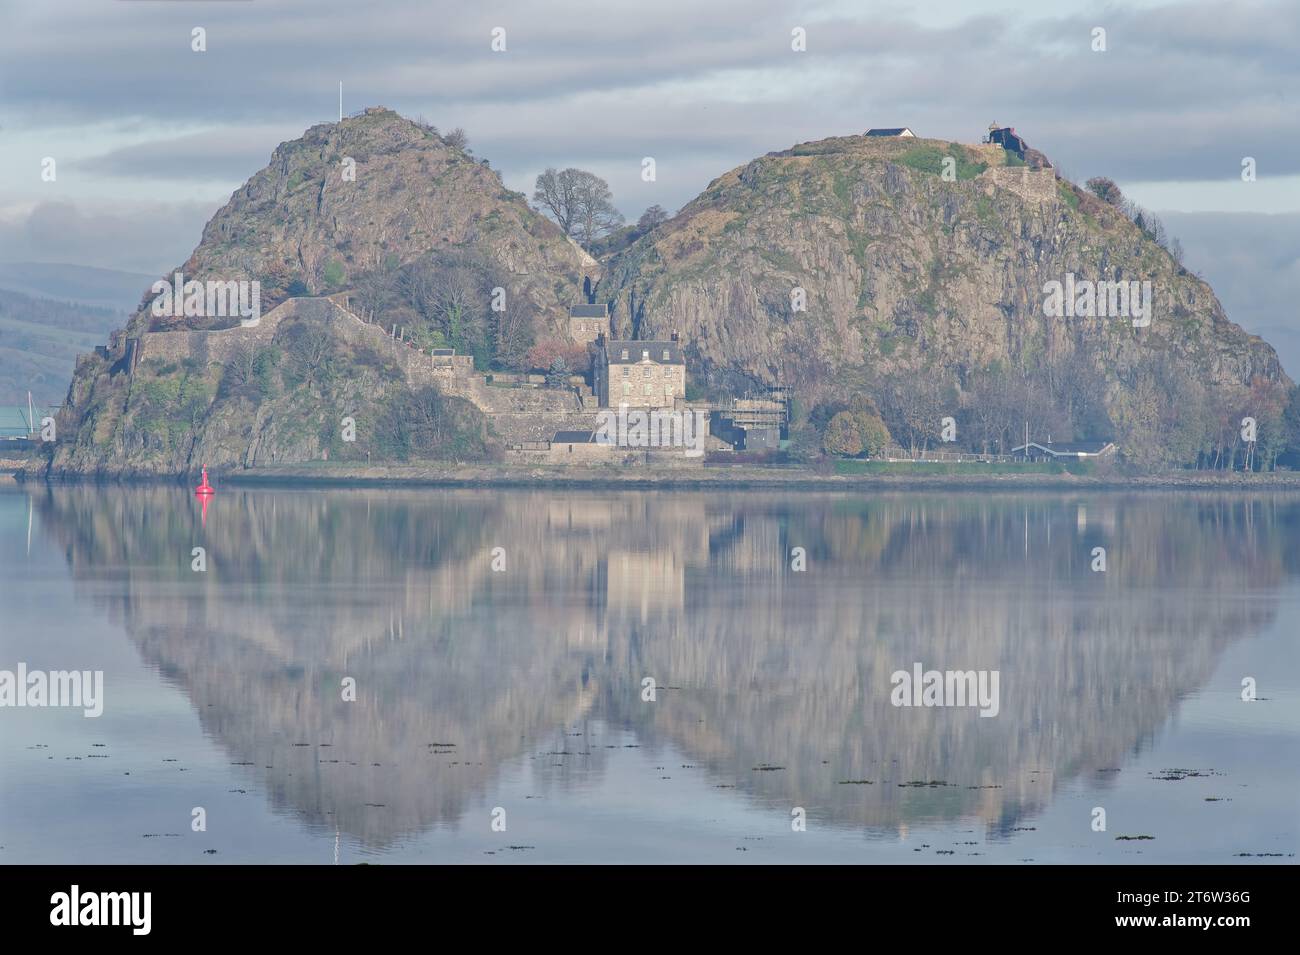 Dumbarton castle on volcanic rock overlooking the River Clyde Stock Photo